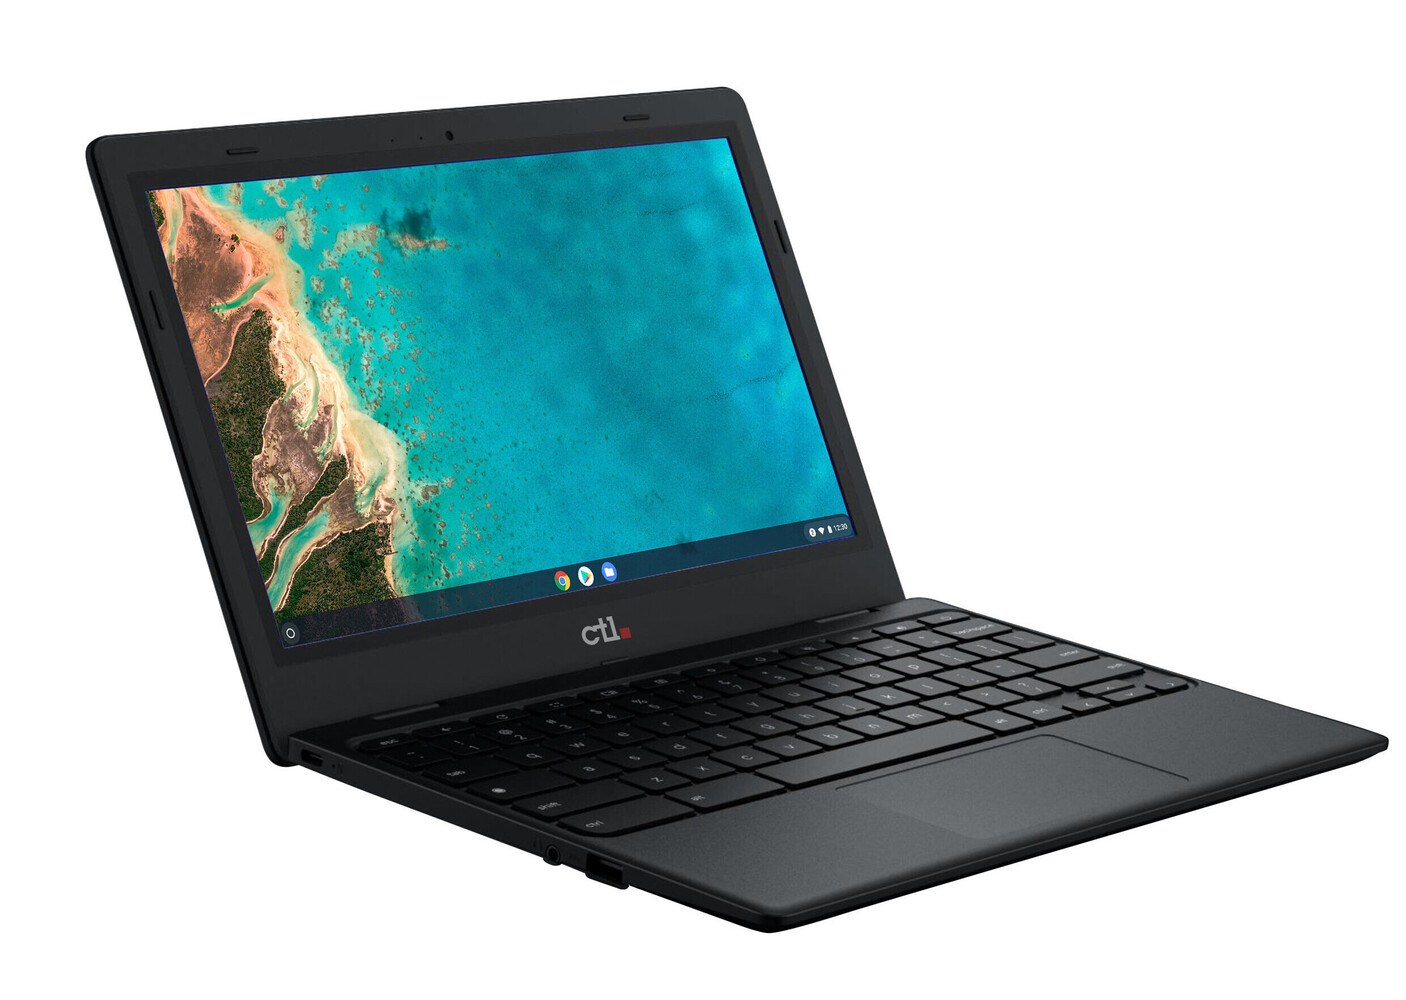 CTL Introduces Two New Chromebooks Featuring Intel Jasper Lake Processors